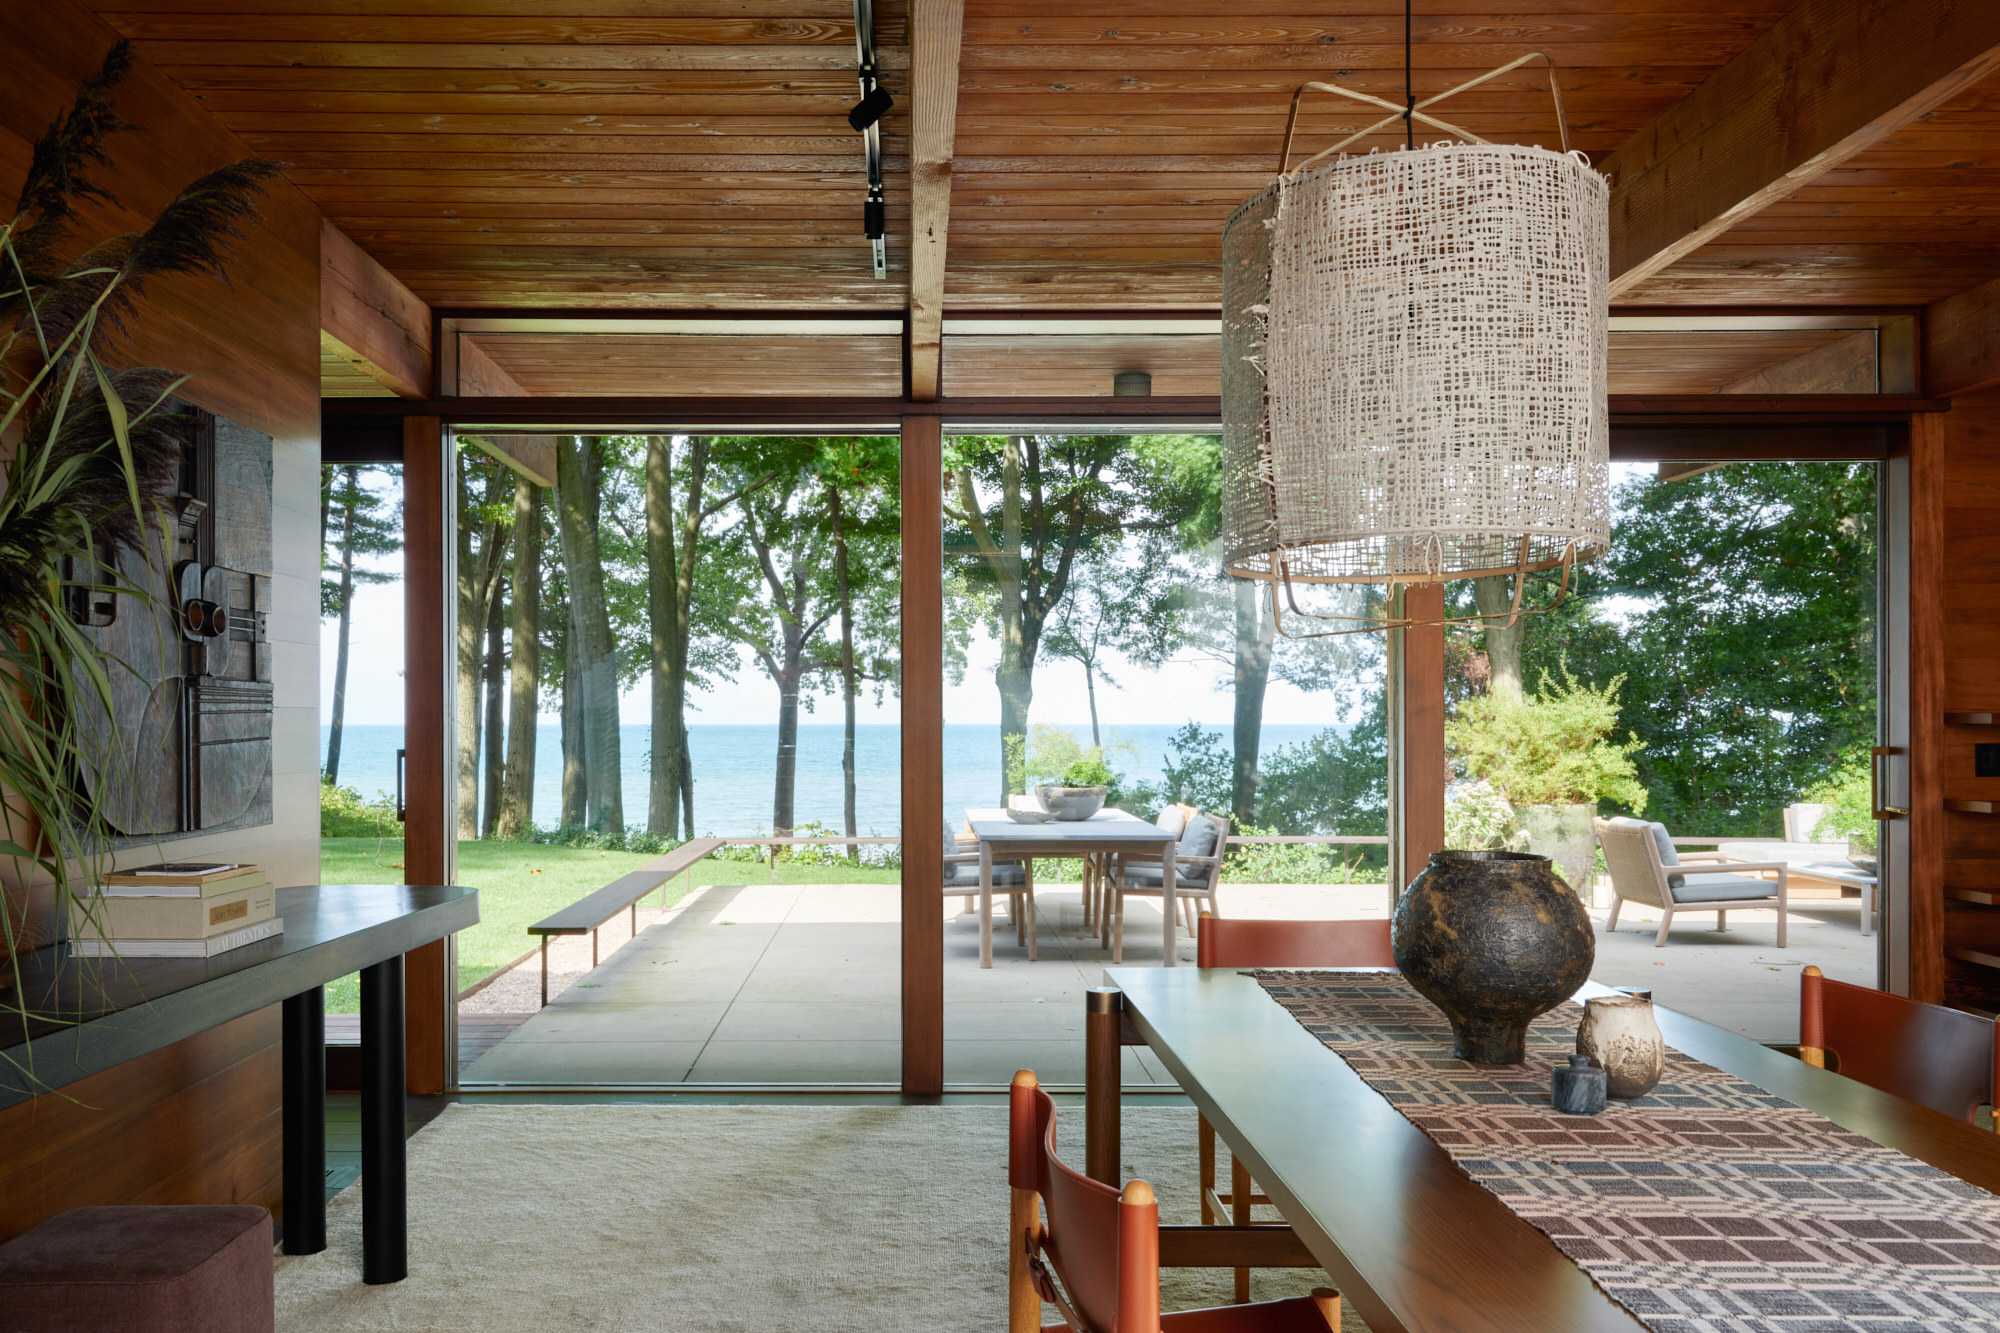 In her Lakeside Midcentury project, Celine Robbins renovated a 1938 home by architect Henry Dubin to create a perfect fusion between interiors and architecture - Effect Magazine